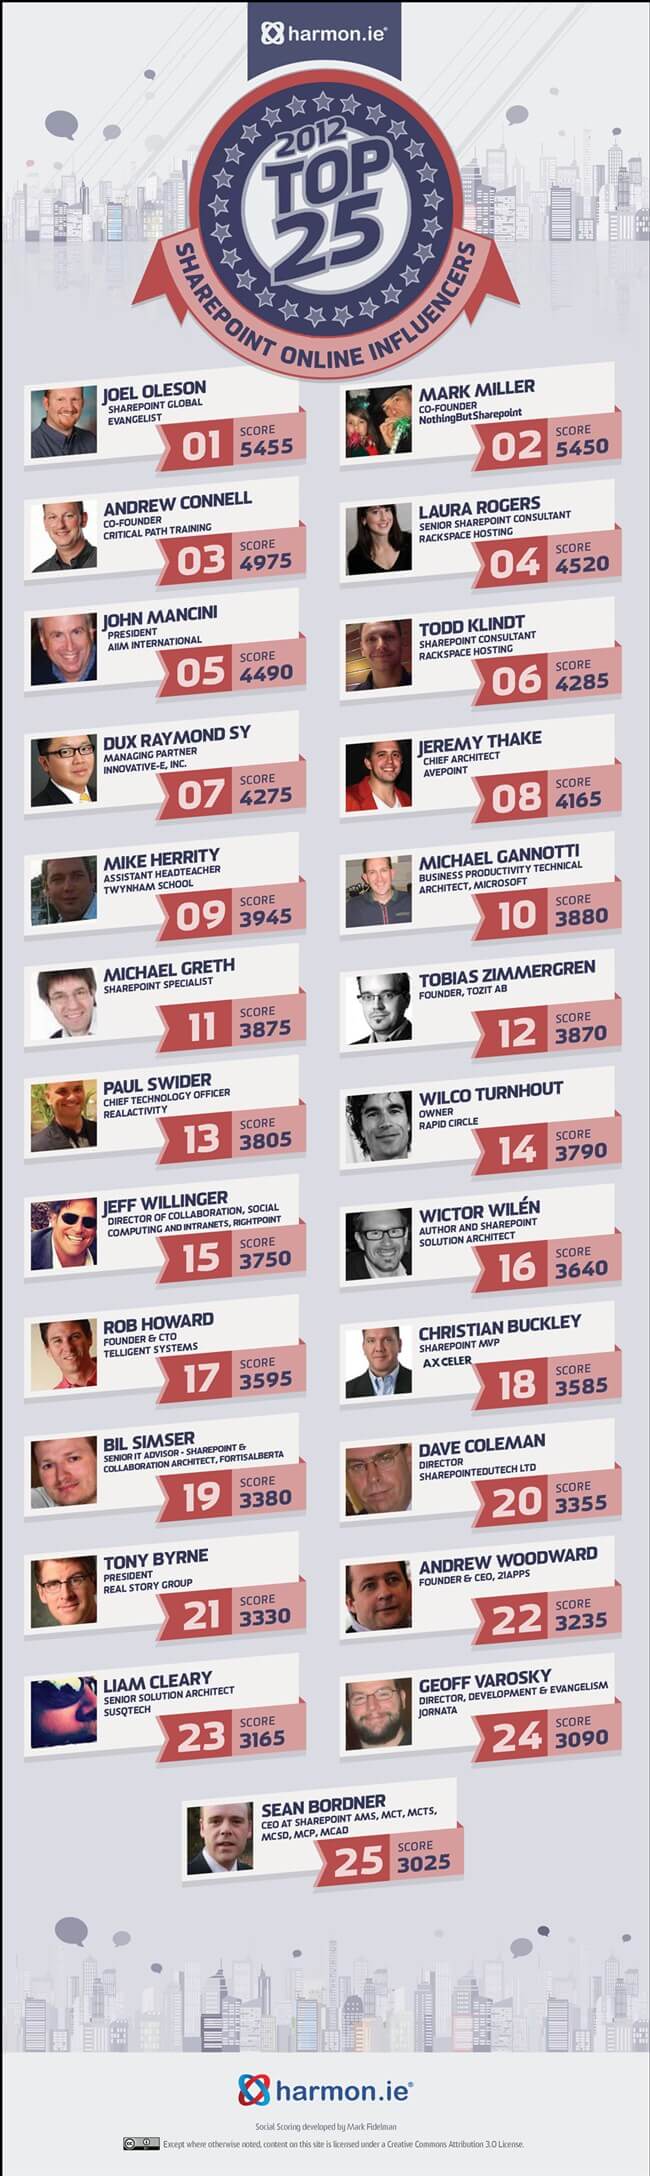 The Top 25 Most Influential Online SharePoint Influencers for 2012